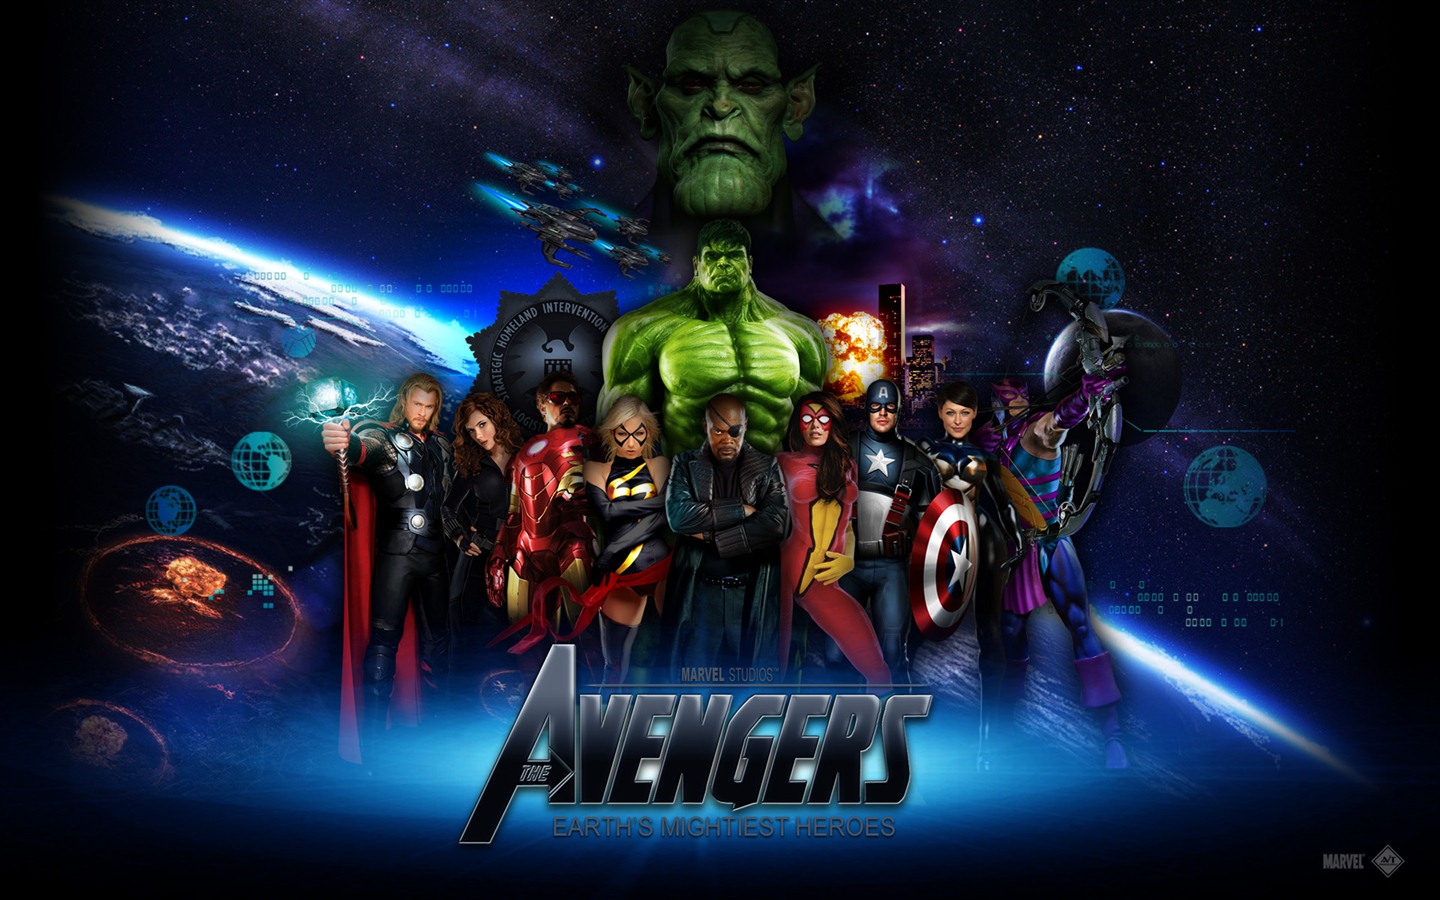 The Avengers 2012 HD wallpapers #12 - 1440x900